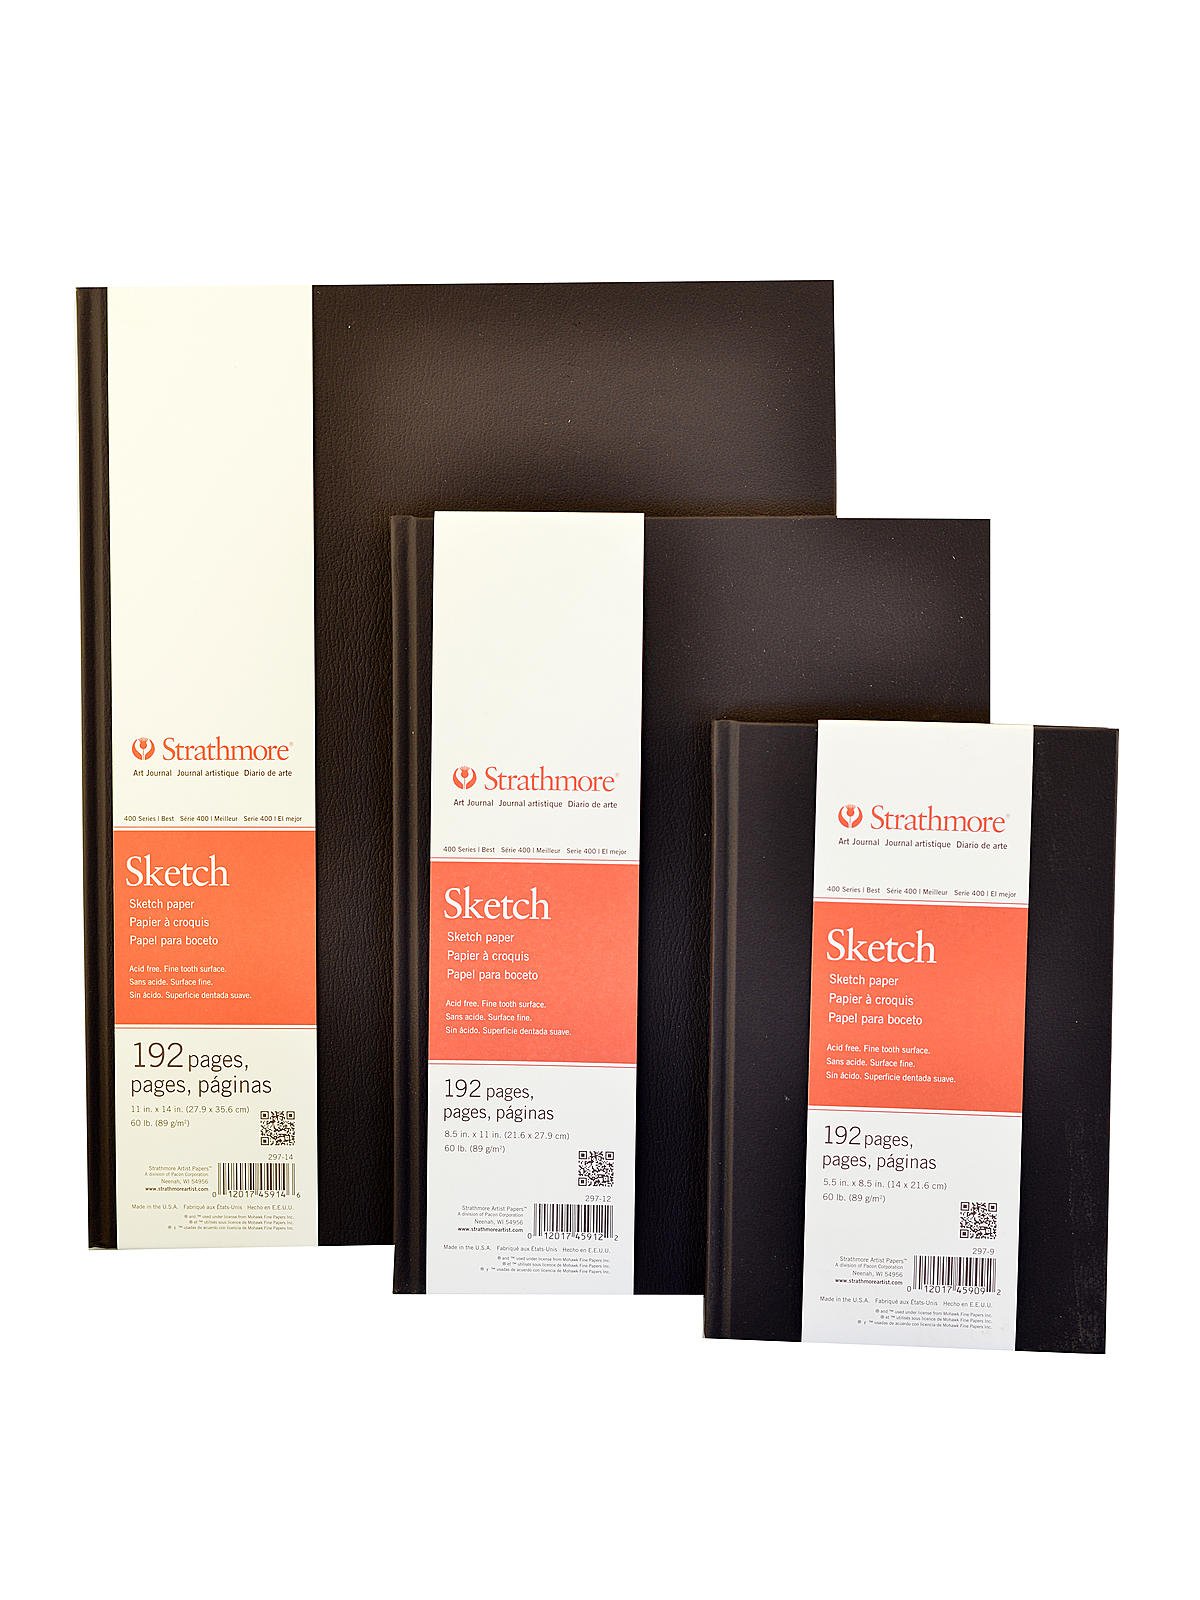 Strathmore 400 Series 60 Recycled Sketch Pad view sizes